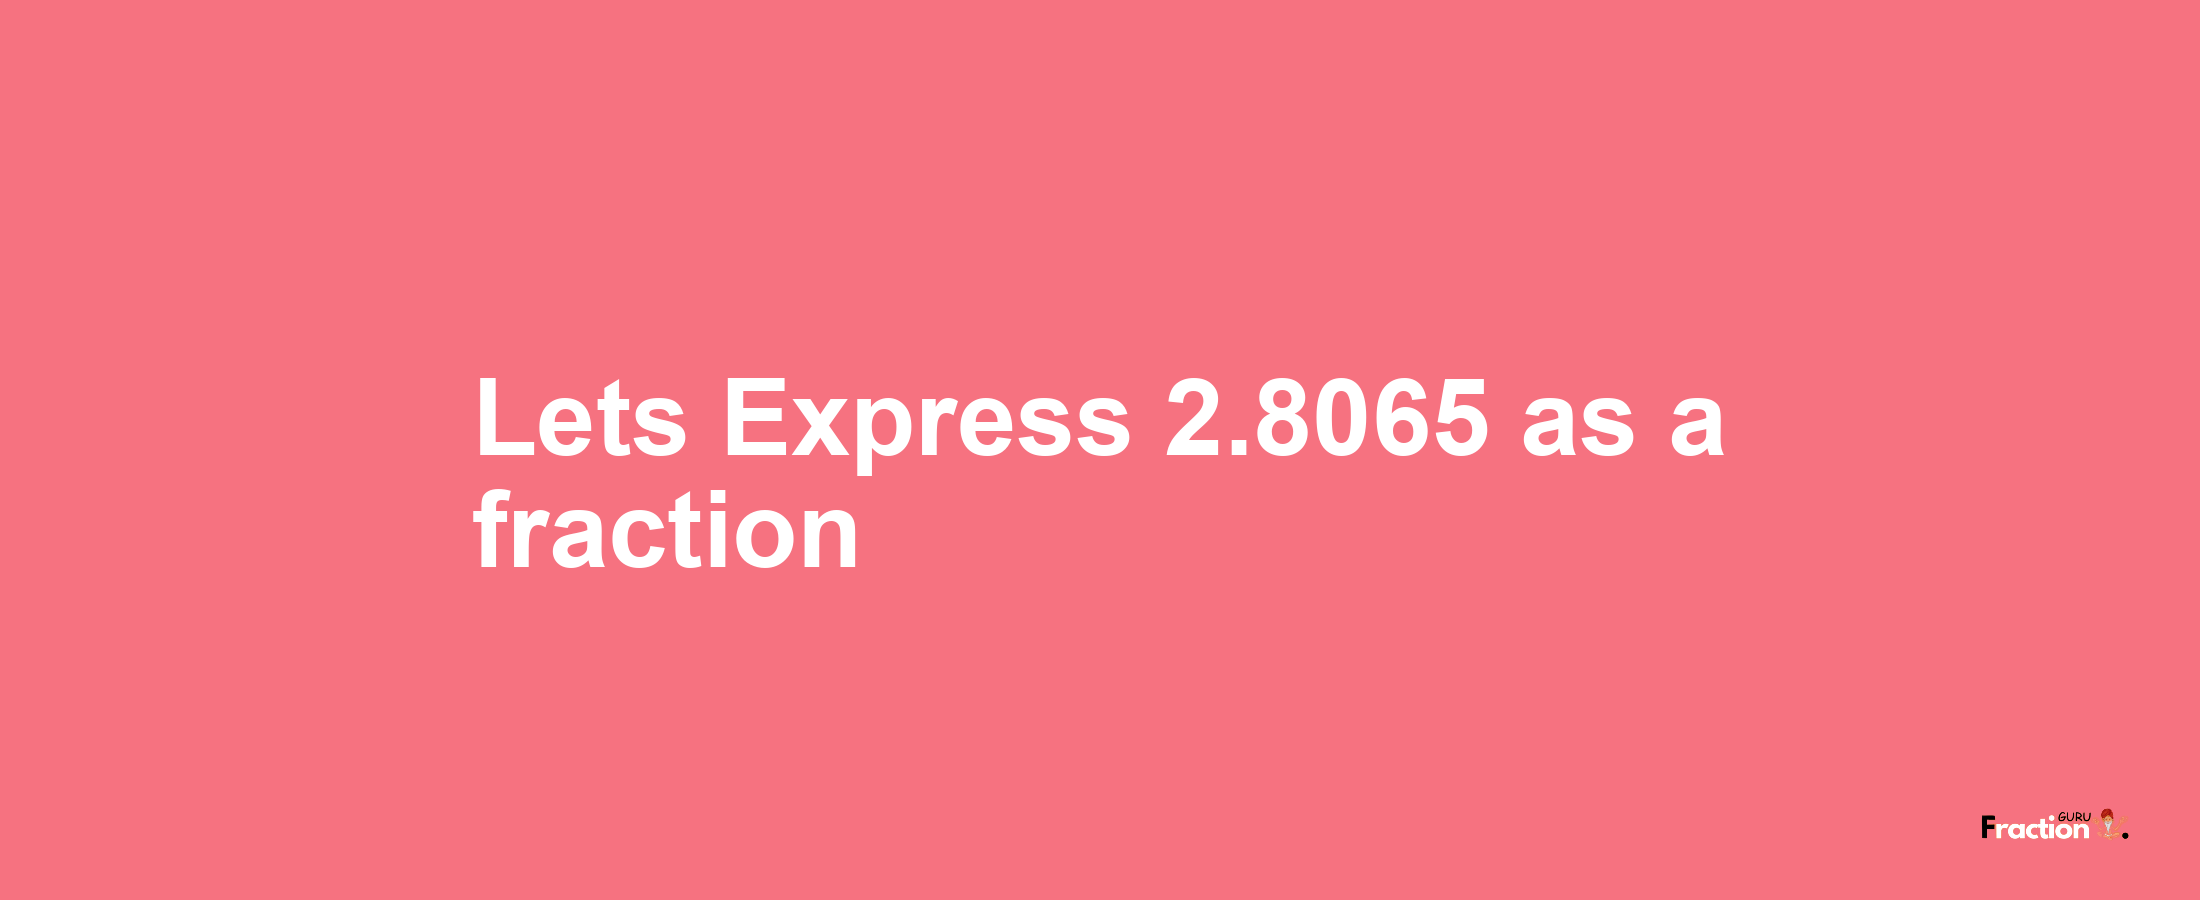 Lets Express 2.8065 as afraction